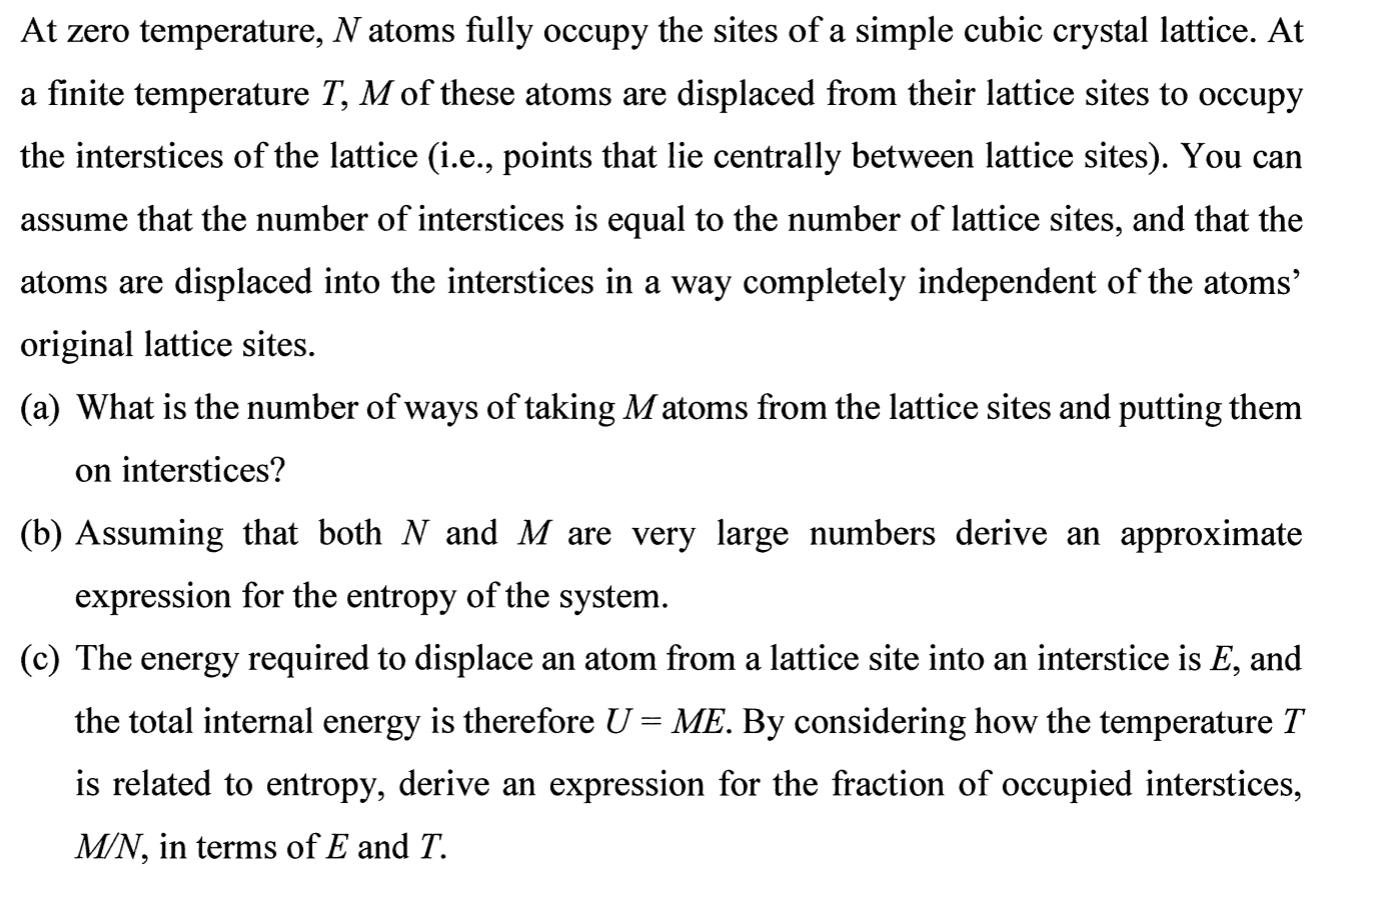 At zero temperature, N atoms fully occupy the sites of a simple cubic crystal lattice. At a finite